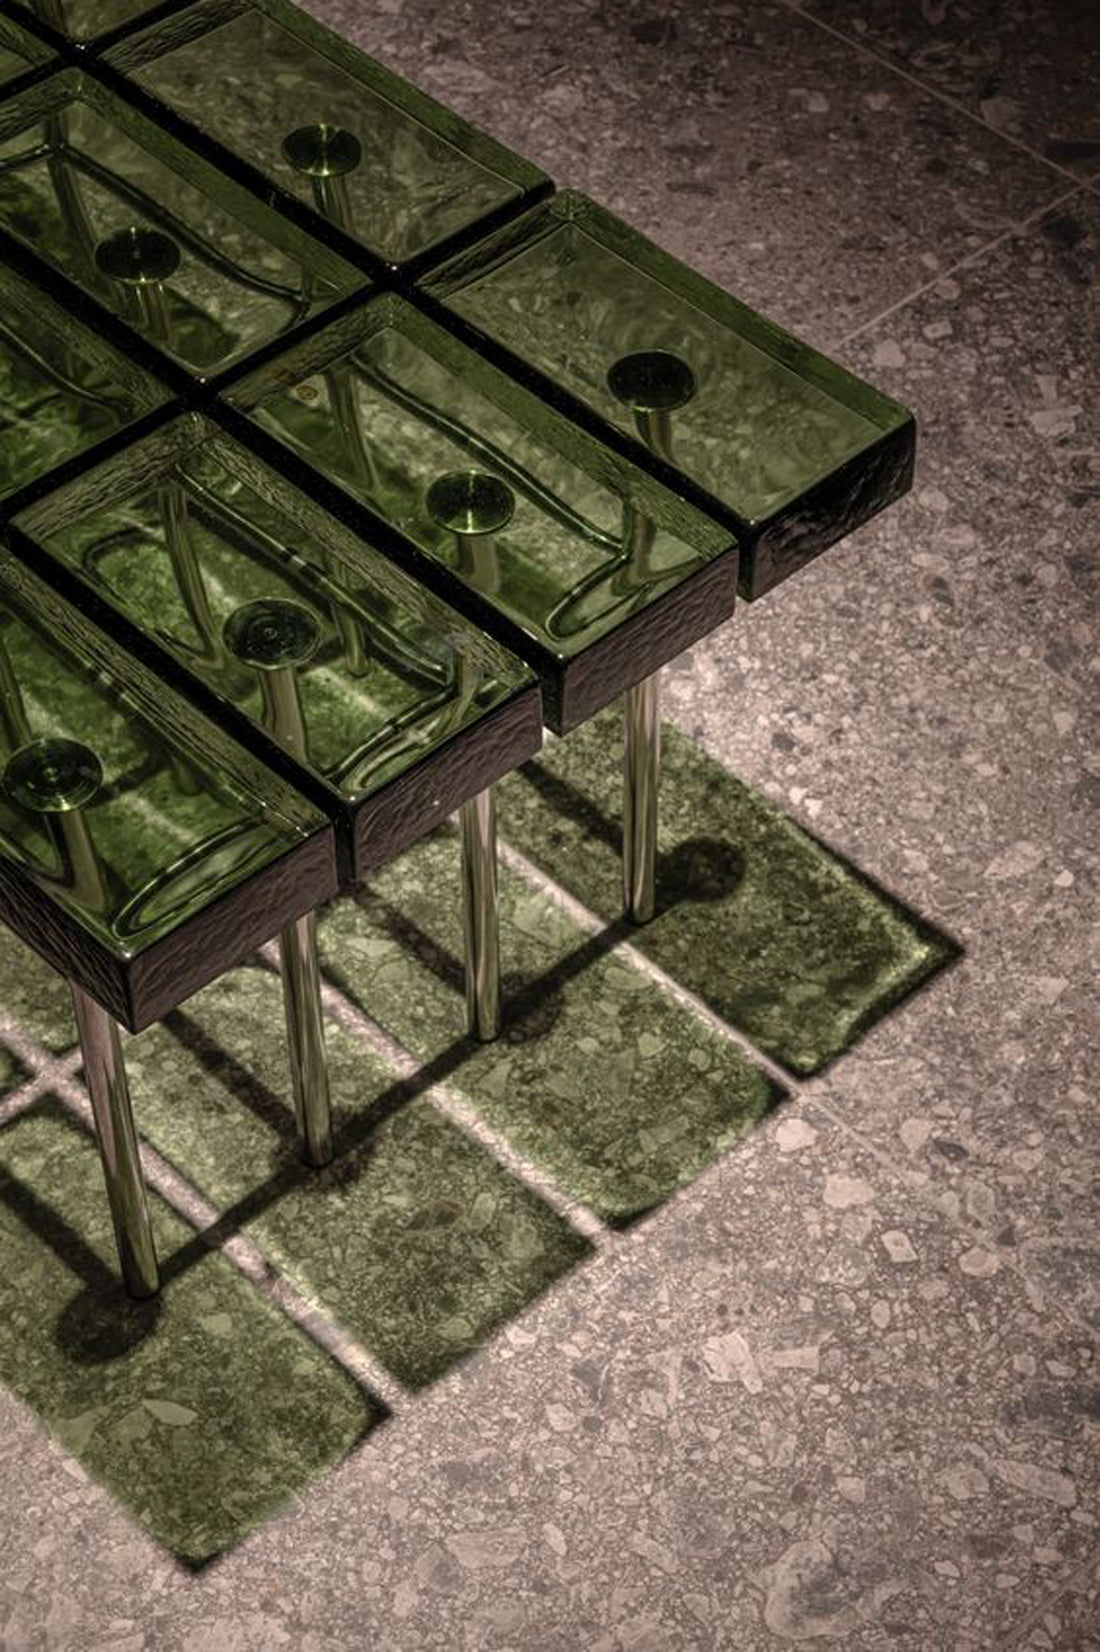 Green glass bricks are joined together to form a table.